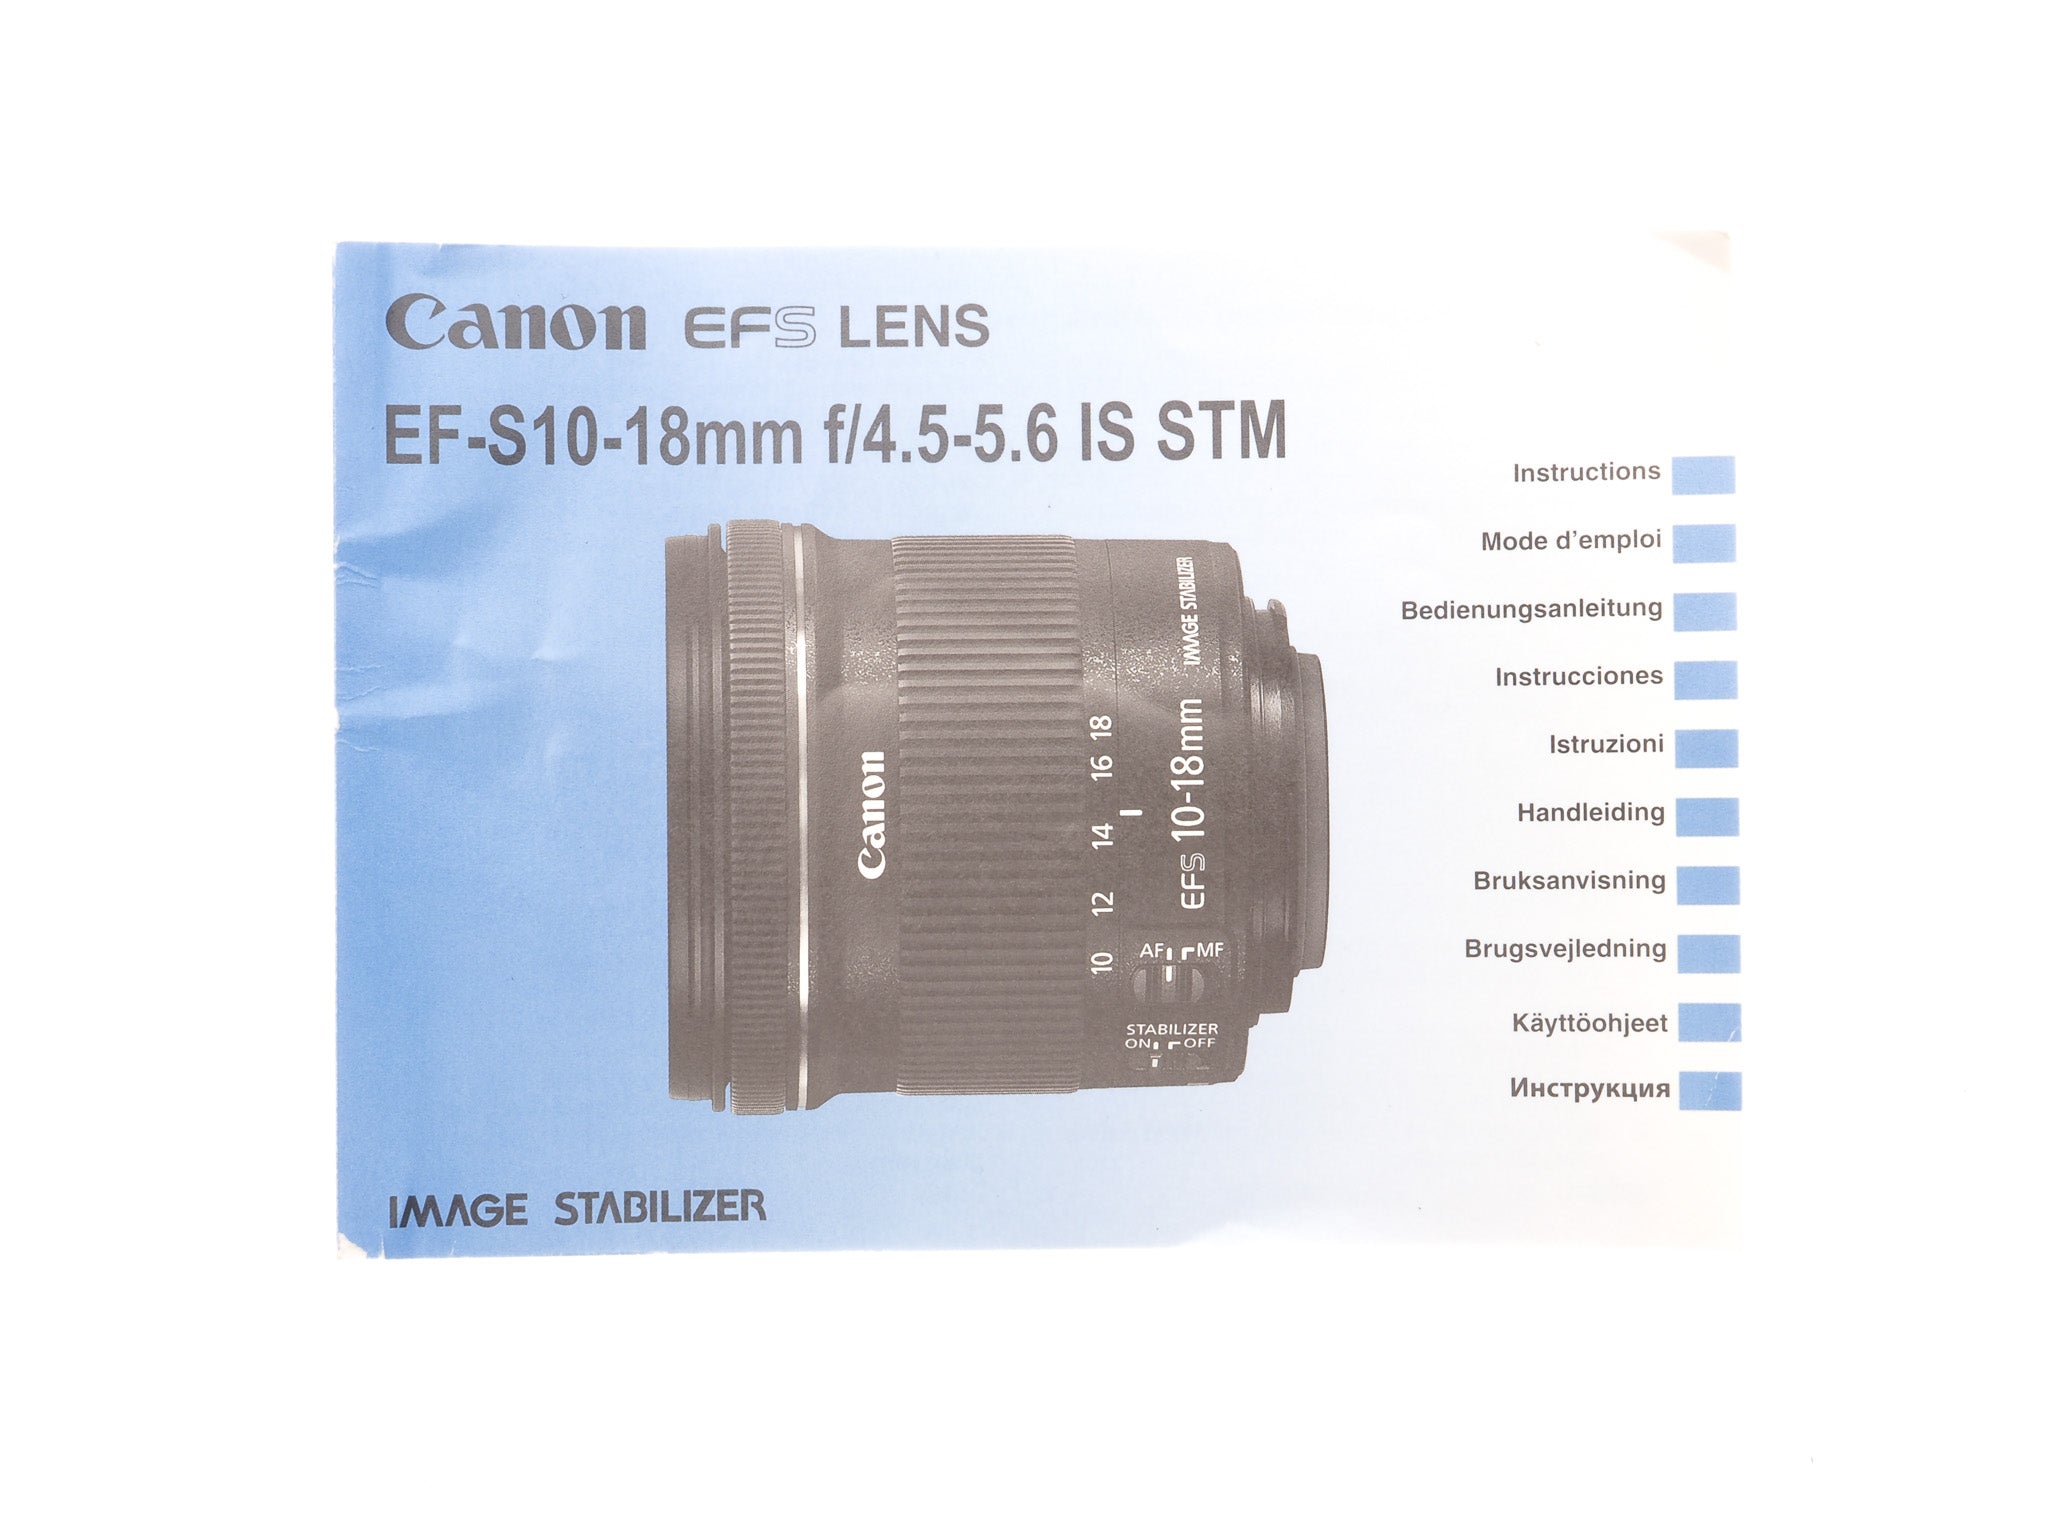 Canon 10-18mm f/4.5-5.6 IS USM Instructions - Accessory – Kamerastore